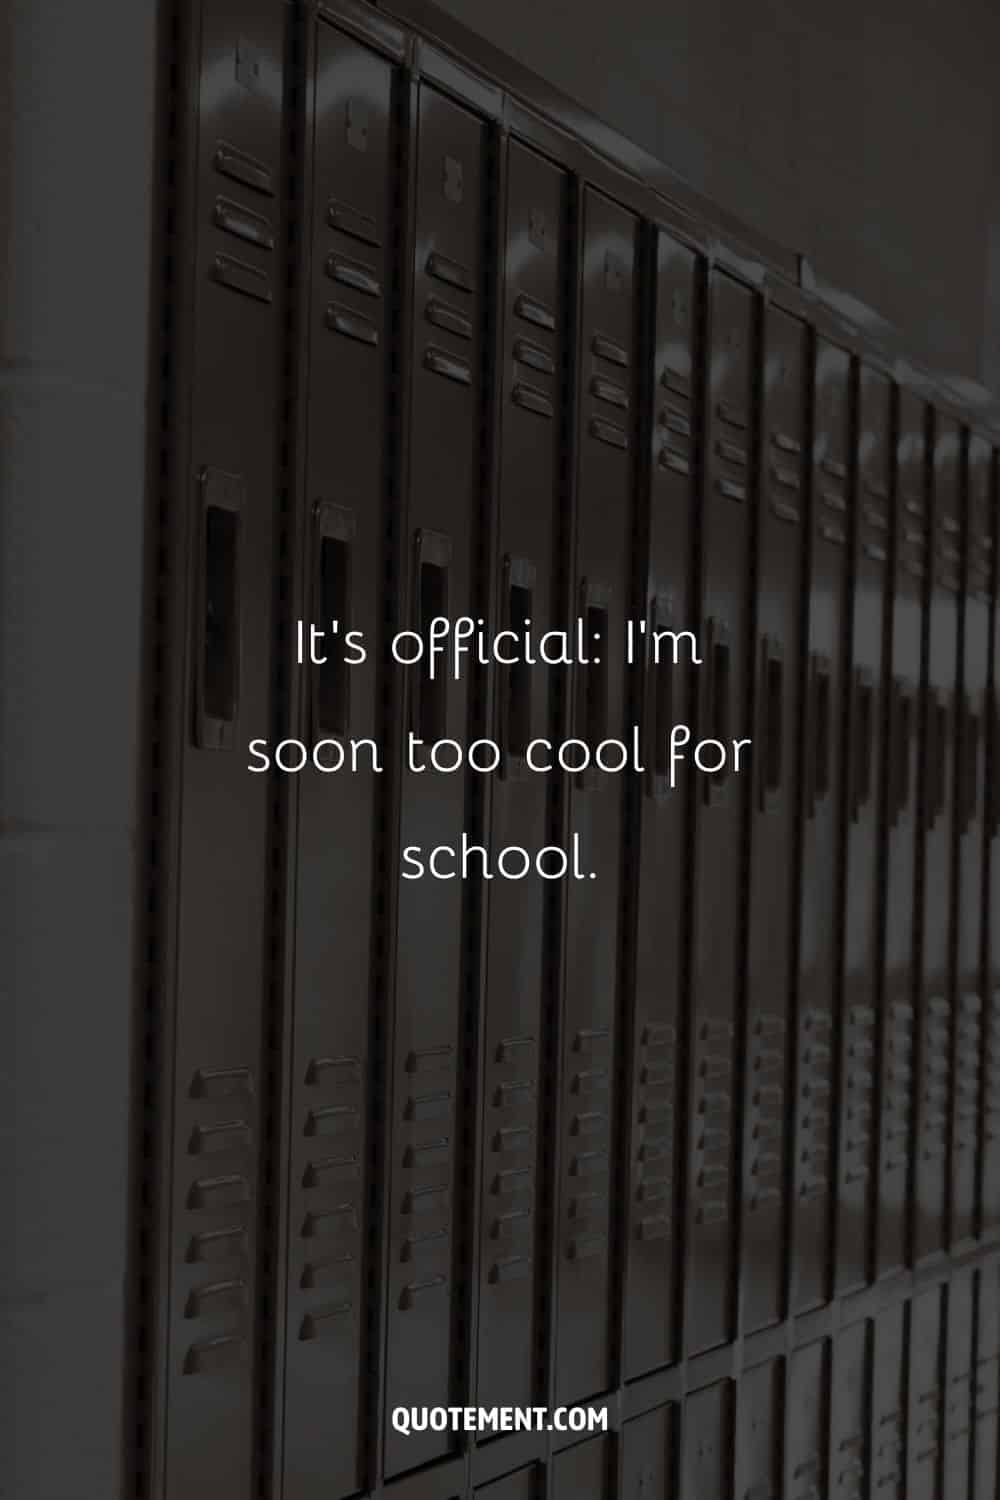 It’s official I’m soon too cool for school.